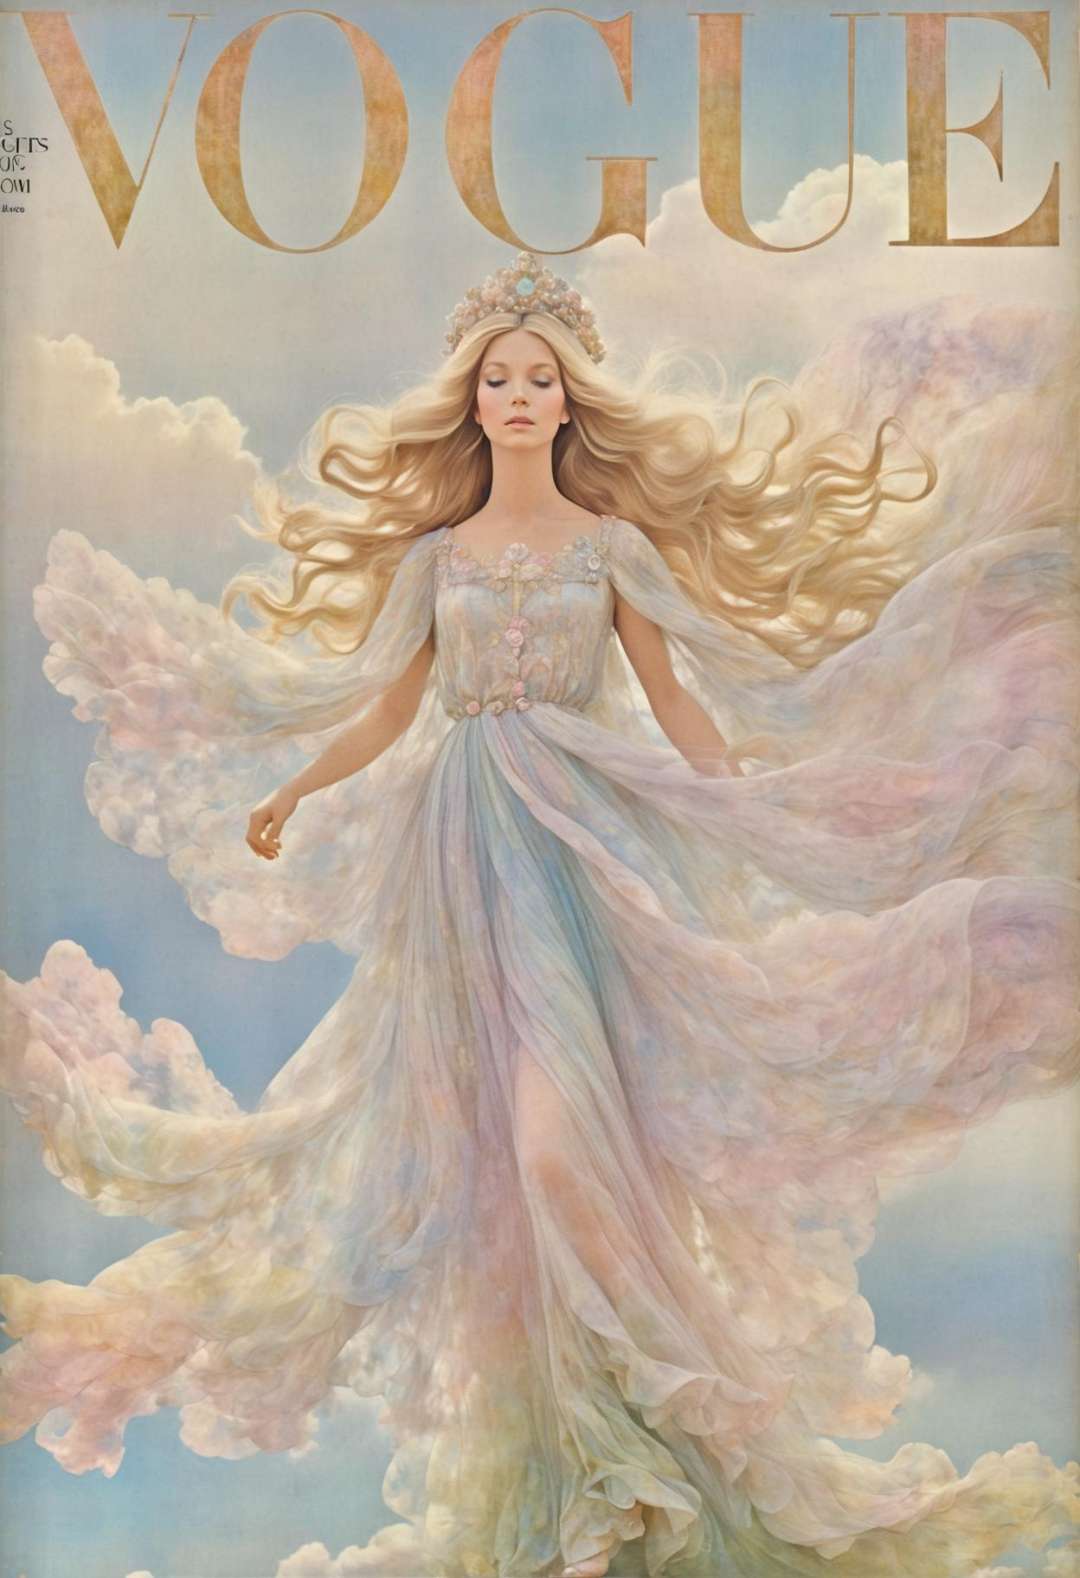 She, opalescent silk, soft pastels, dreamy clouds, flowing dress, fairy-tale allure, whimsical charm, Vogue Fashion Editorial, pastel-hued skies.,highly intricate,(VOGUE Cover Magazine:1.15),1968, 60s, black letters, hyper detailed, photorealistic,,